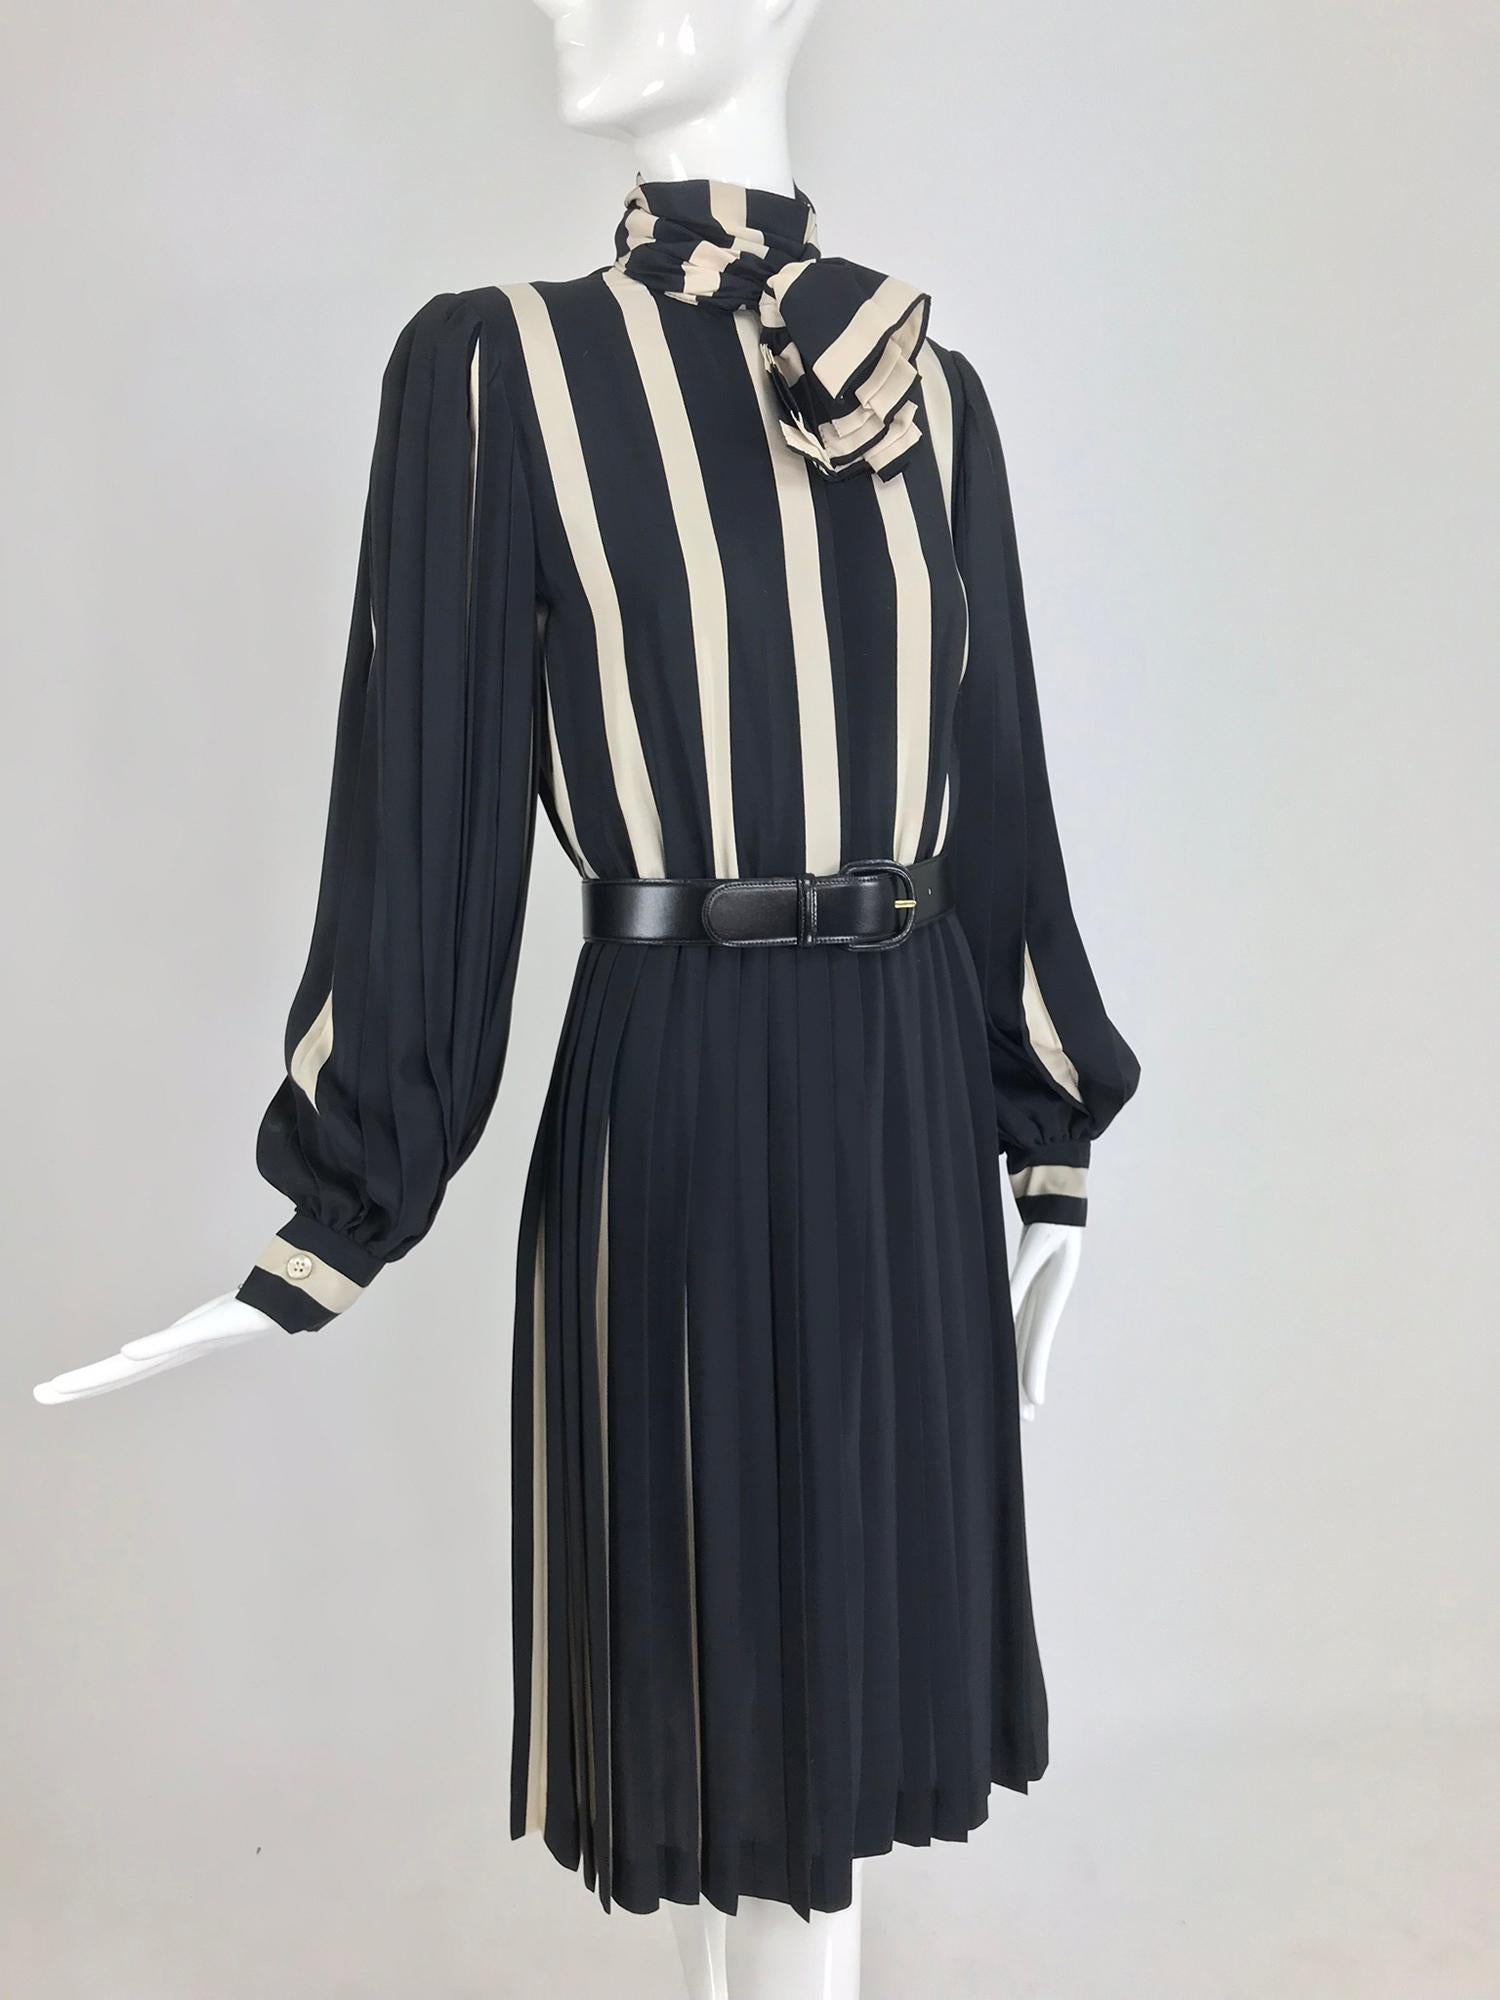 Bill Blass pleated silk black and tan stripe dress from the 1970s. Shirtwaist style dress features long full pleated sleeves with banded cuffs that close with buttons. The dress closes at the front with hidden buttons, there is an attached neck wrap